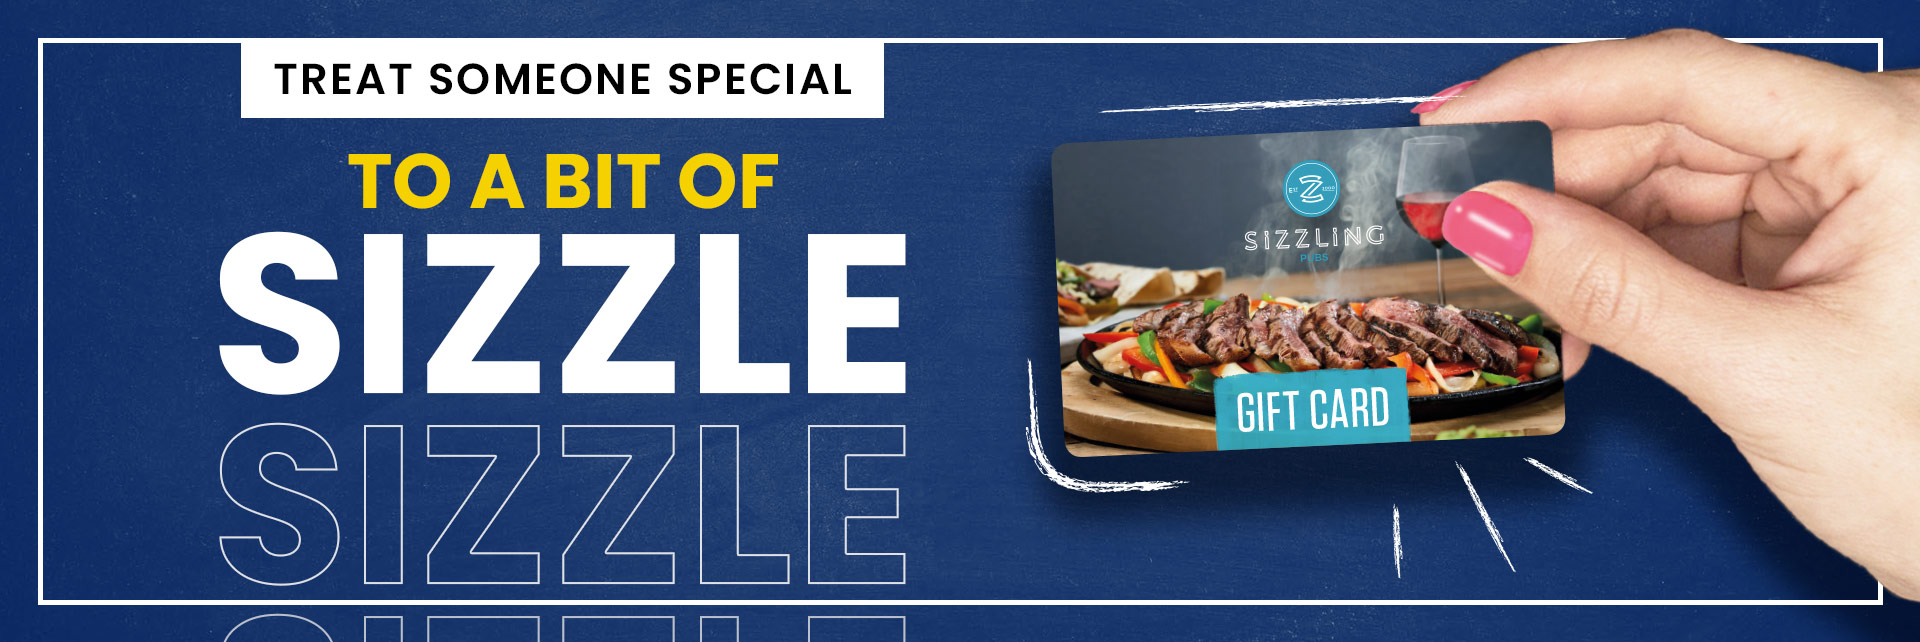 Sizzling Pubs Gift Card at Black Horse Illey Lane in Birmingham